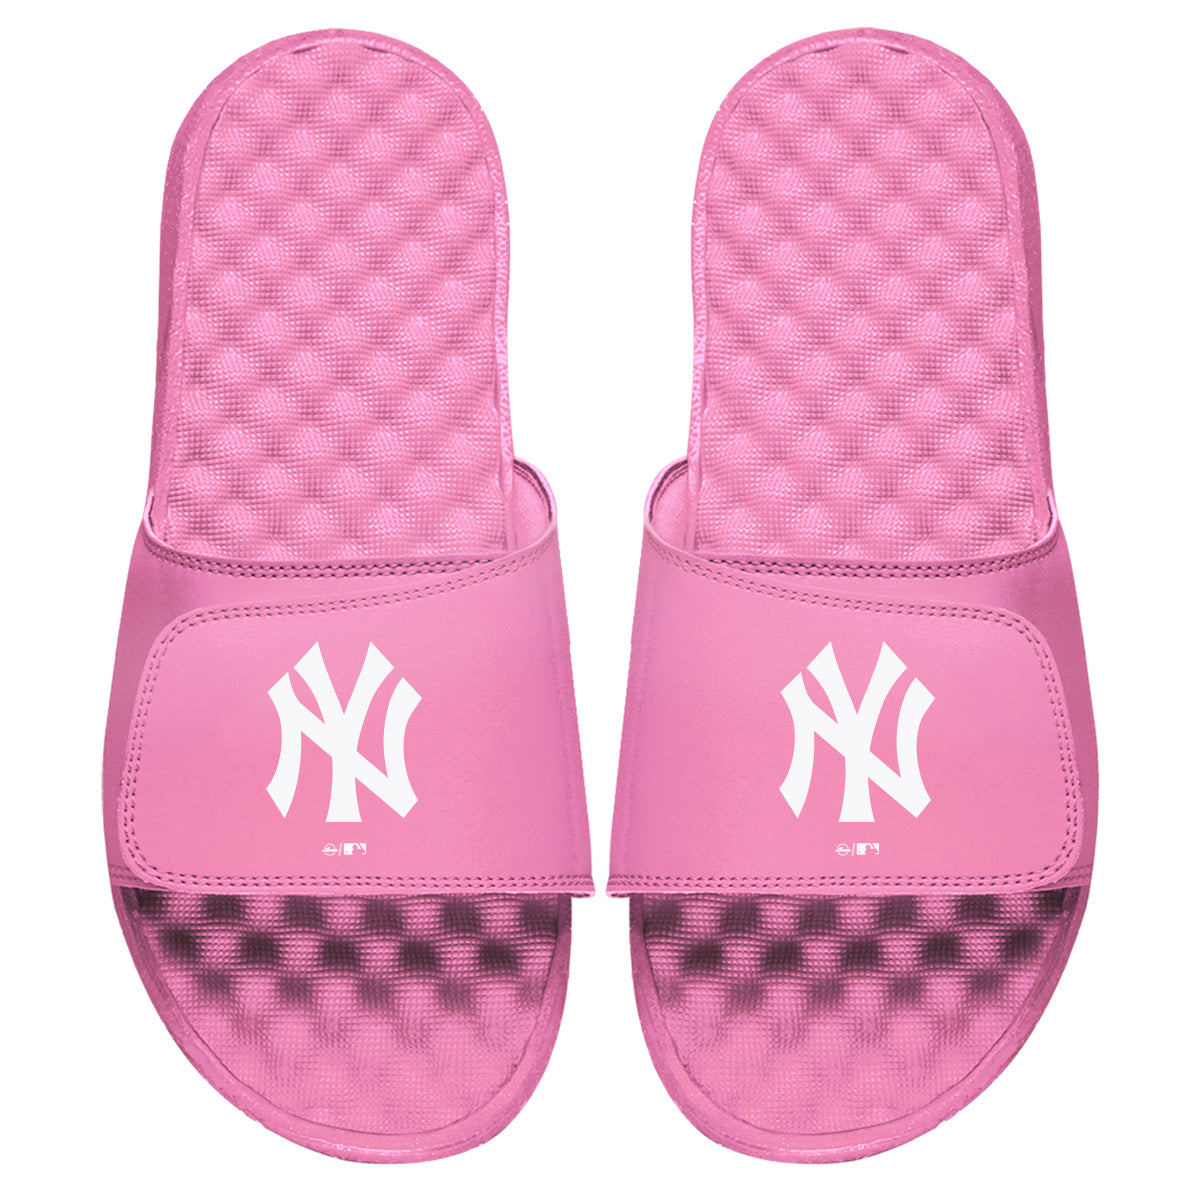 ISlides Official - Yankees Cooperstown Loudmouth 11 / Great White Slides - Sandals - Slippers